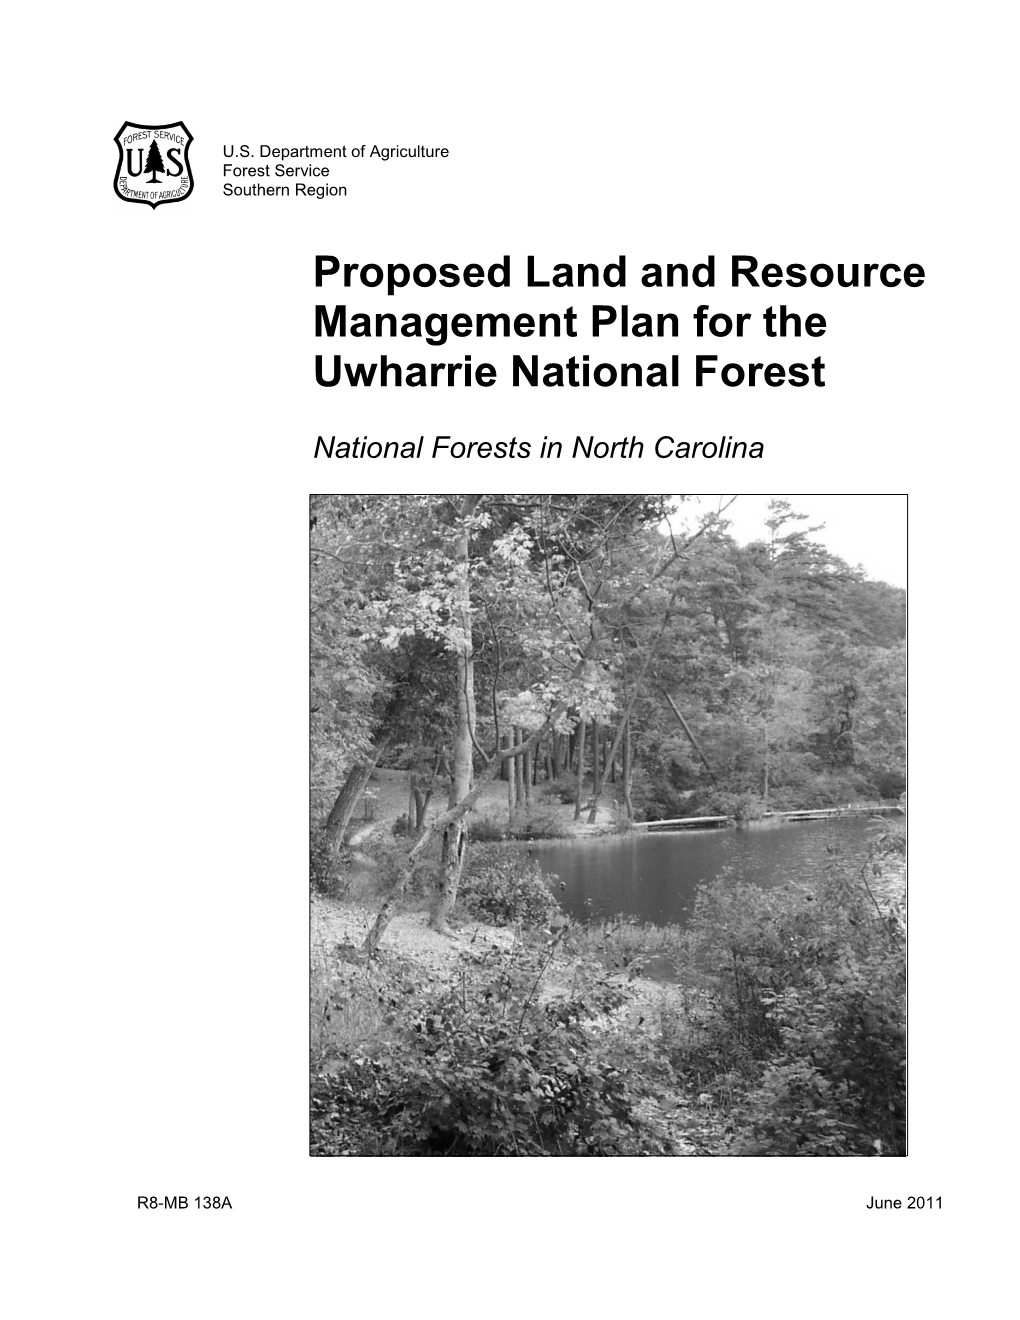 Proposed Land and Resource Management Plan for the Uwharrie National Forest